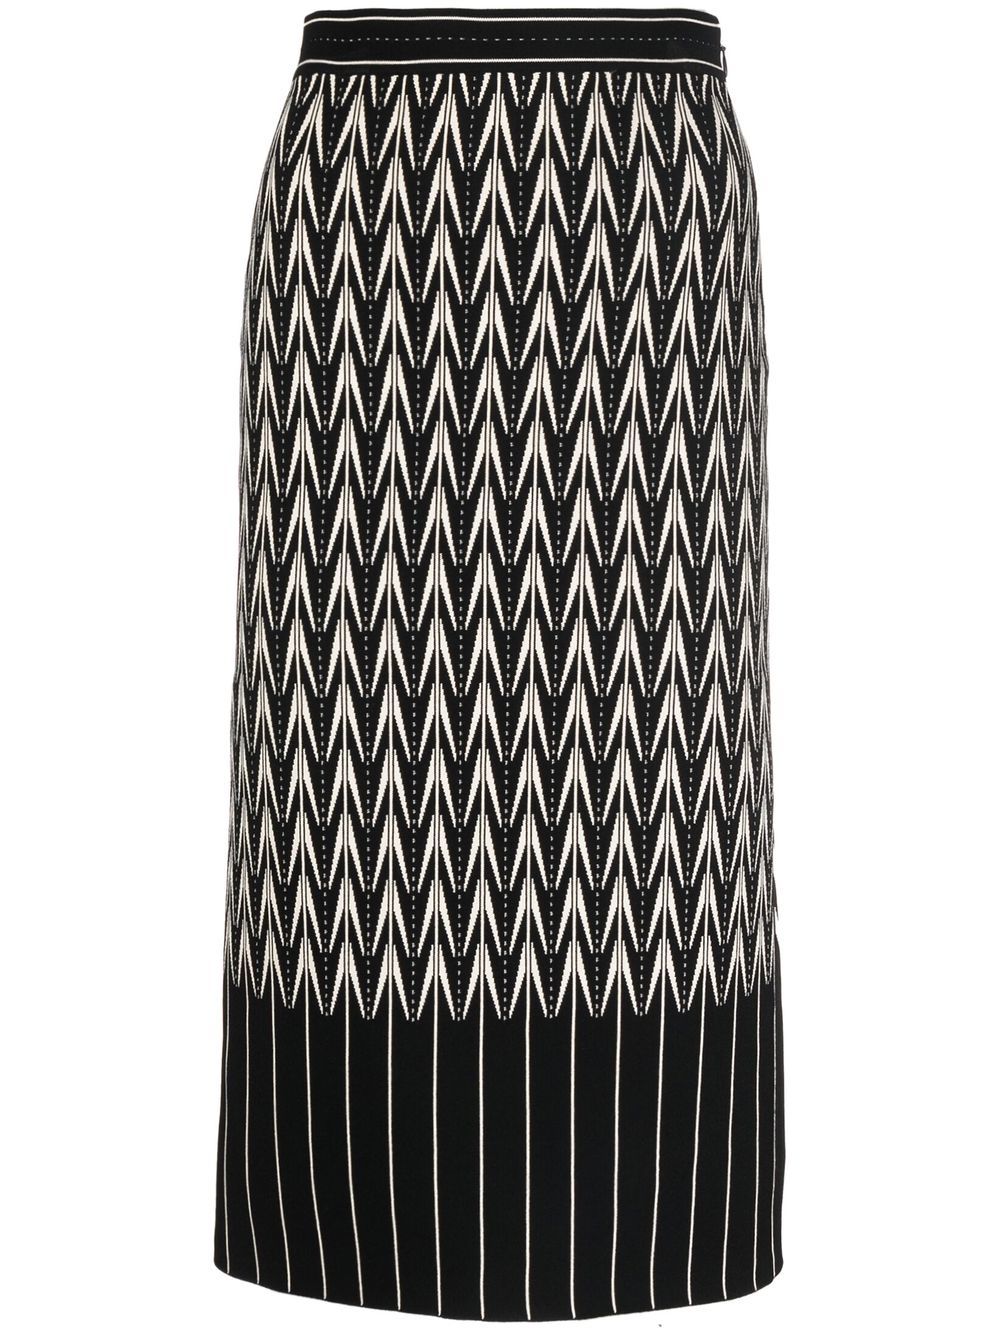 Image 1 of Alexander McQueen high-waisted patterned skirt